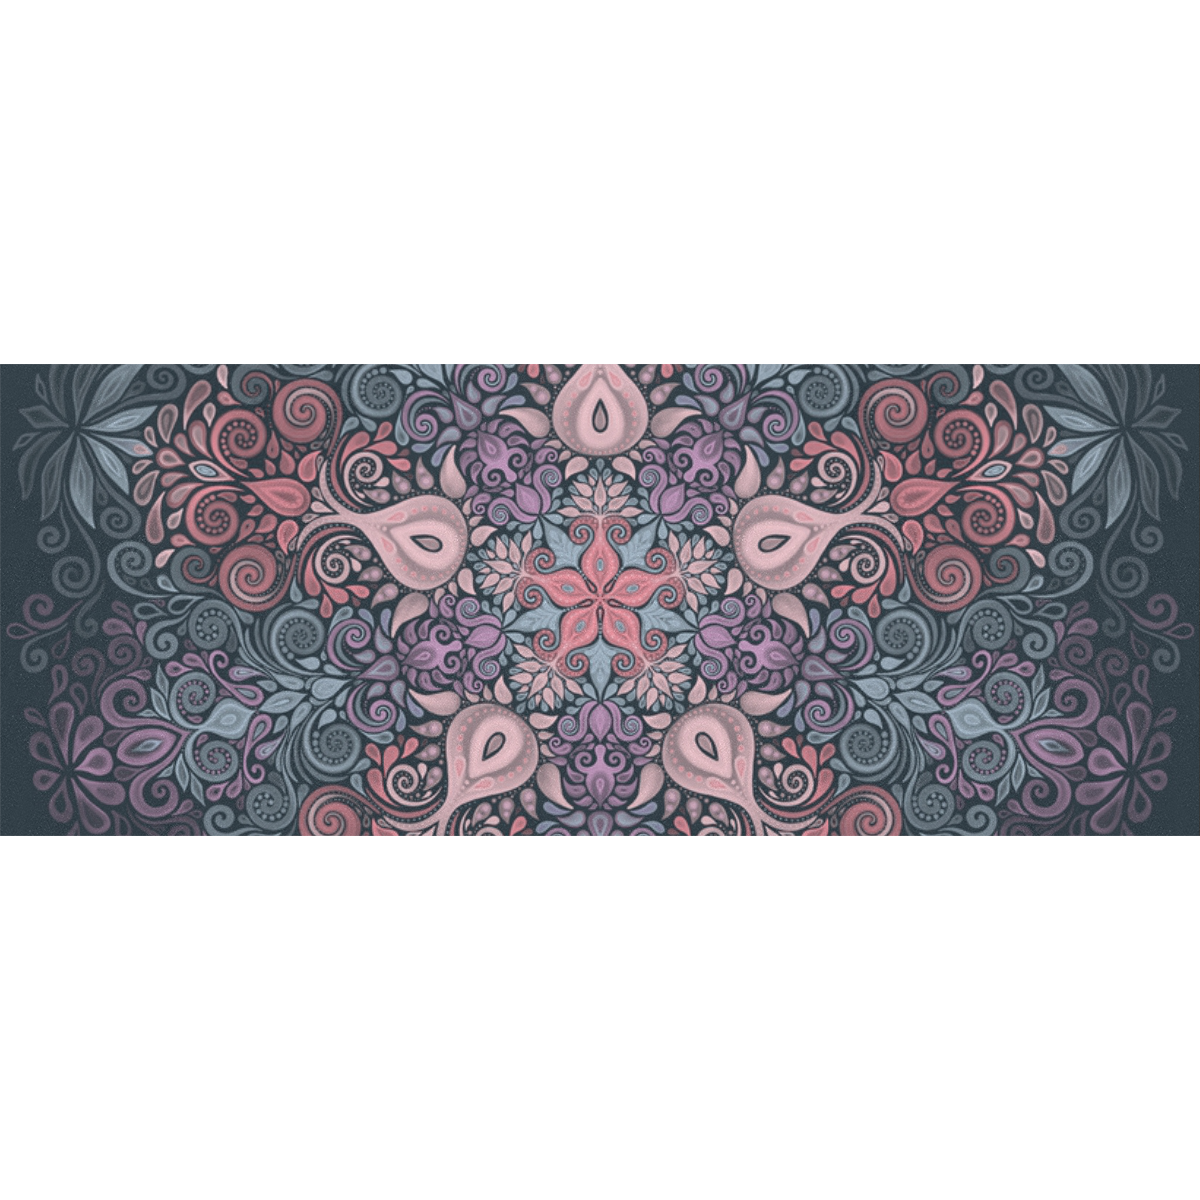 Baroque Garden Watercolor Mandala, pastels Gift Wrapping Paper 58"x 23" (5 Rolls)